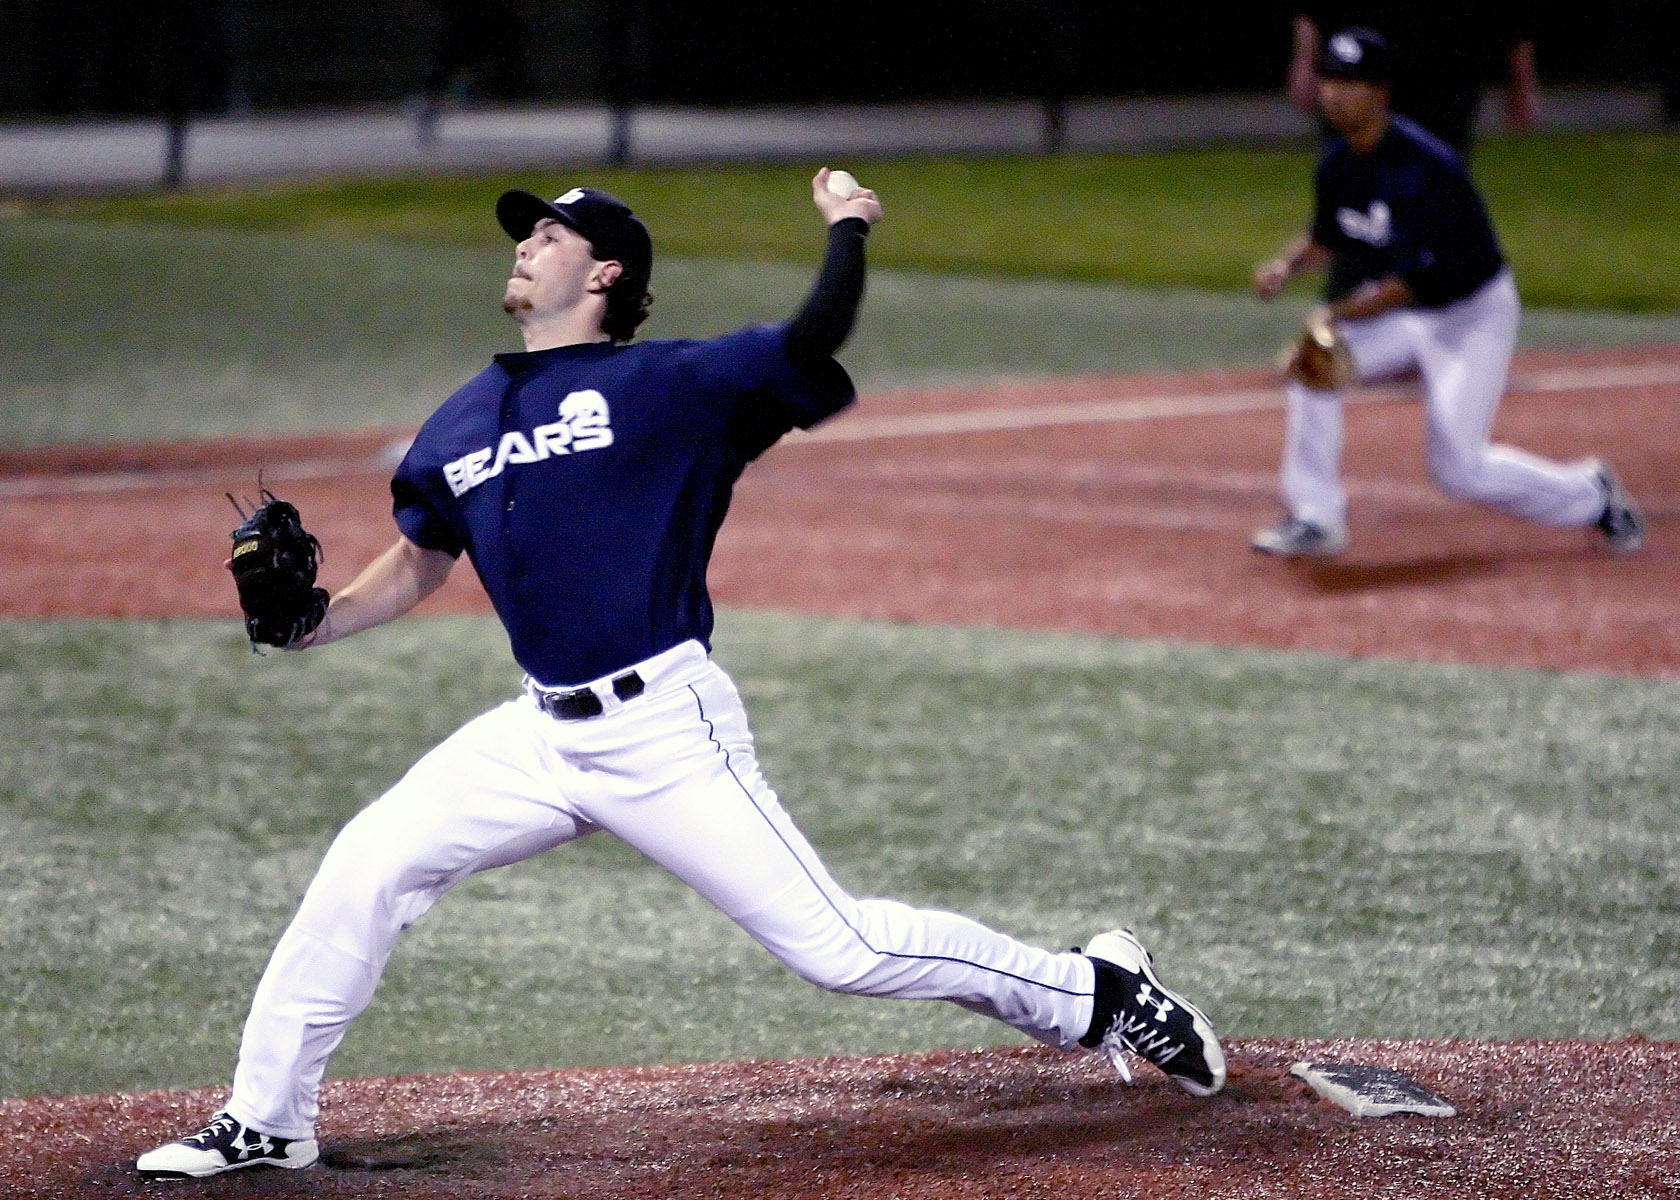 The Bears closing pitcher Connor Bensen delivers his pitch home.  